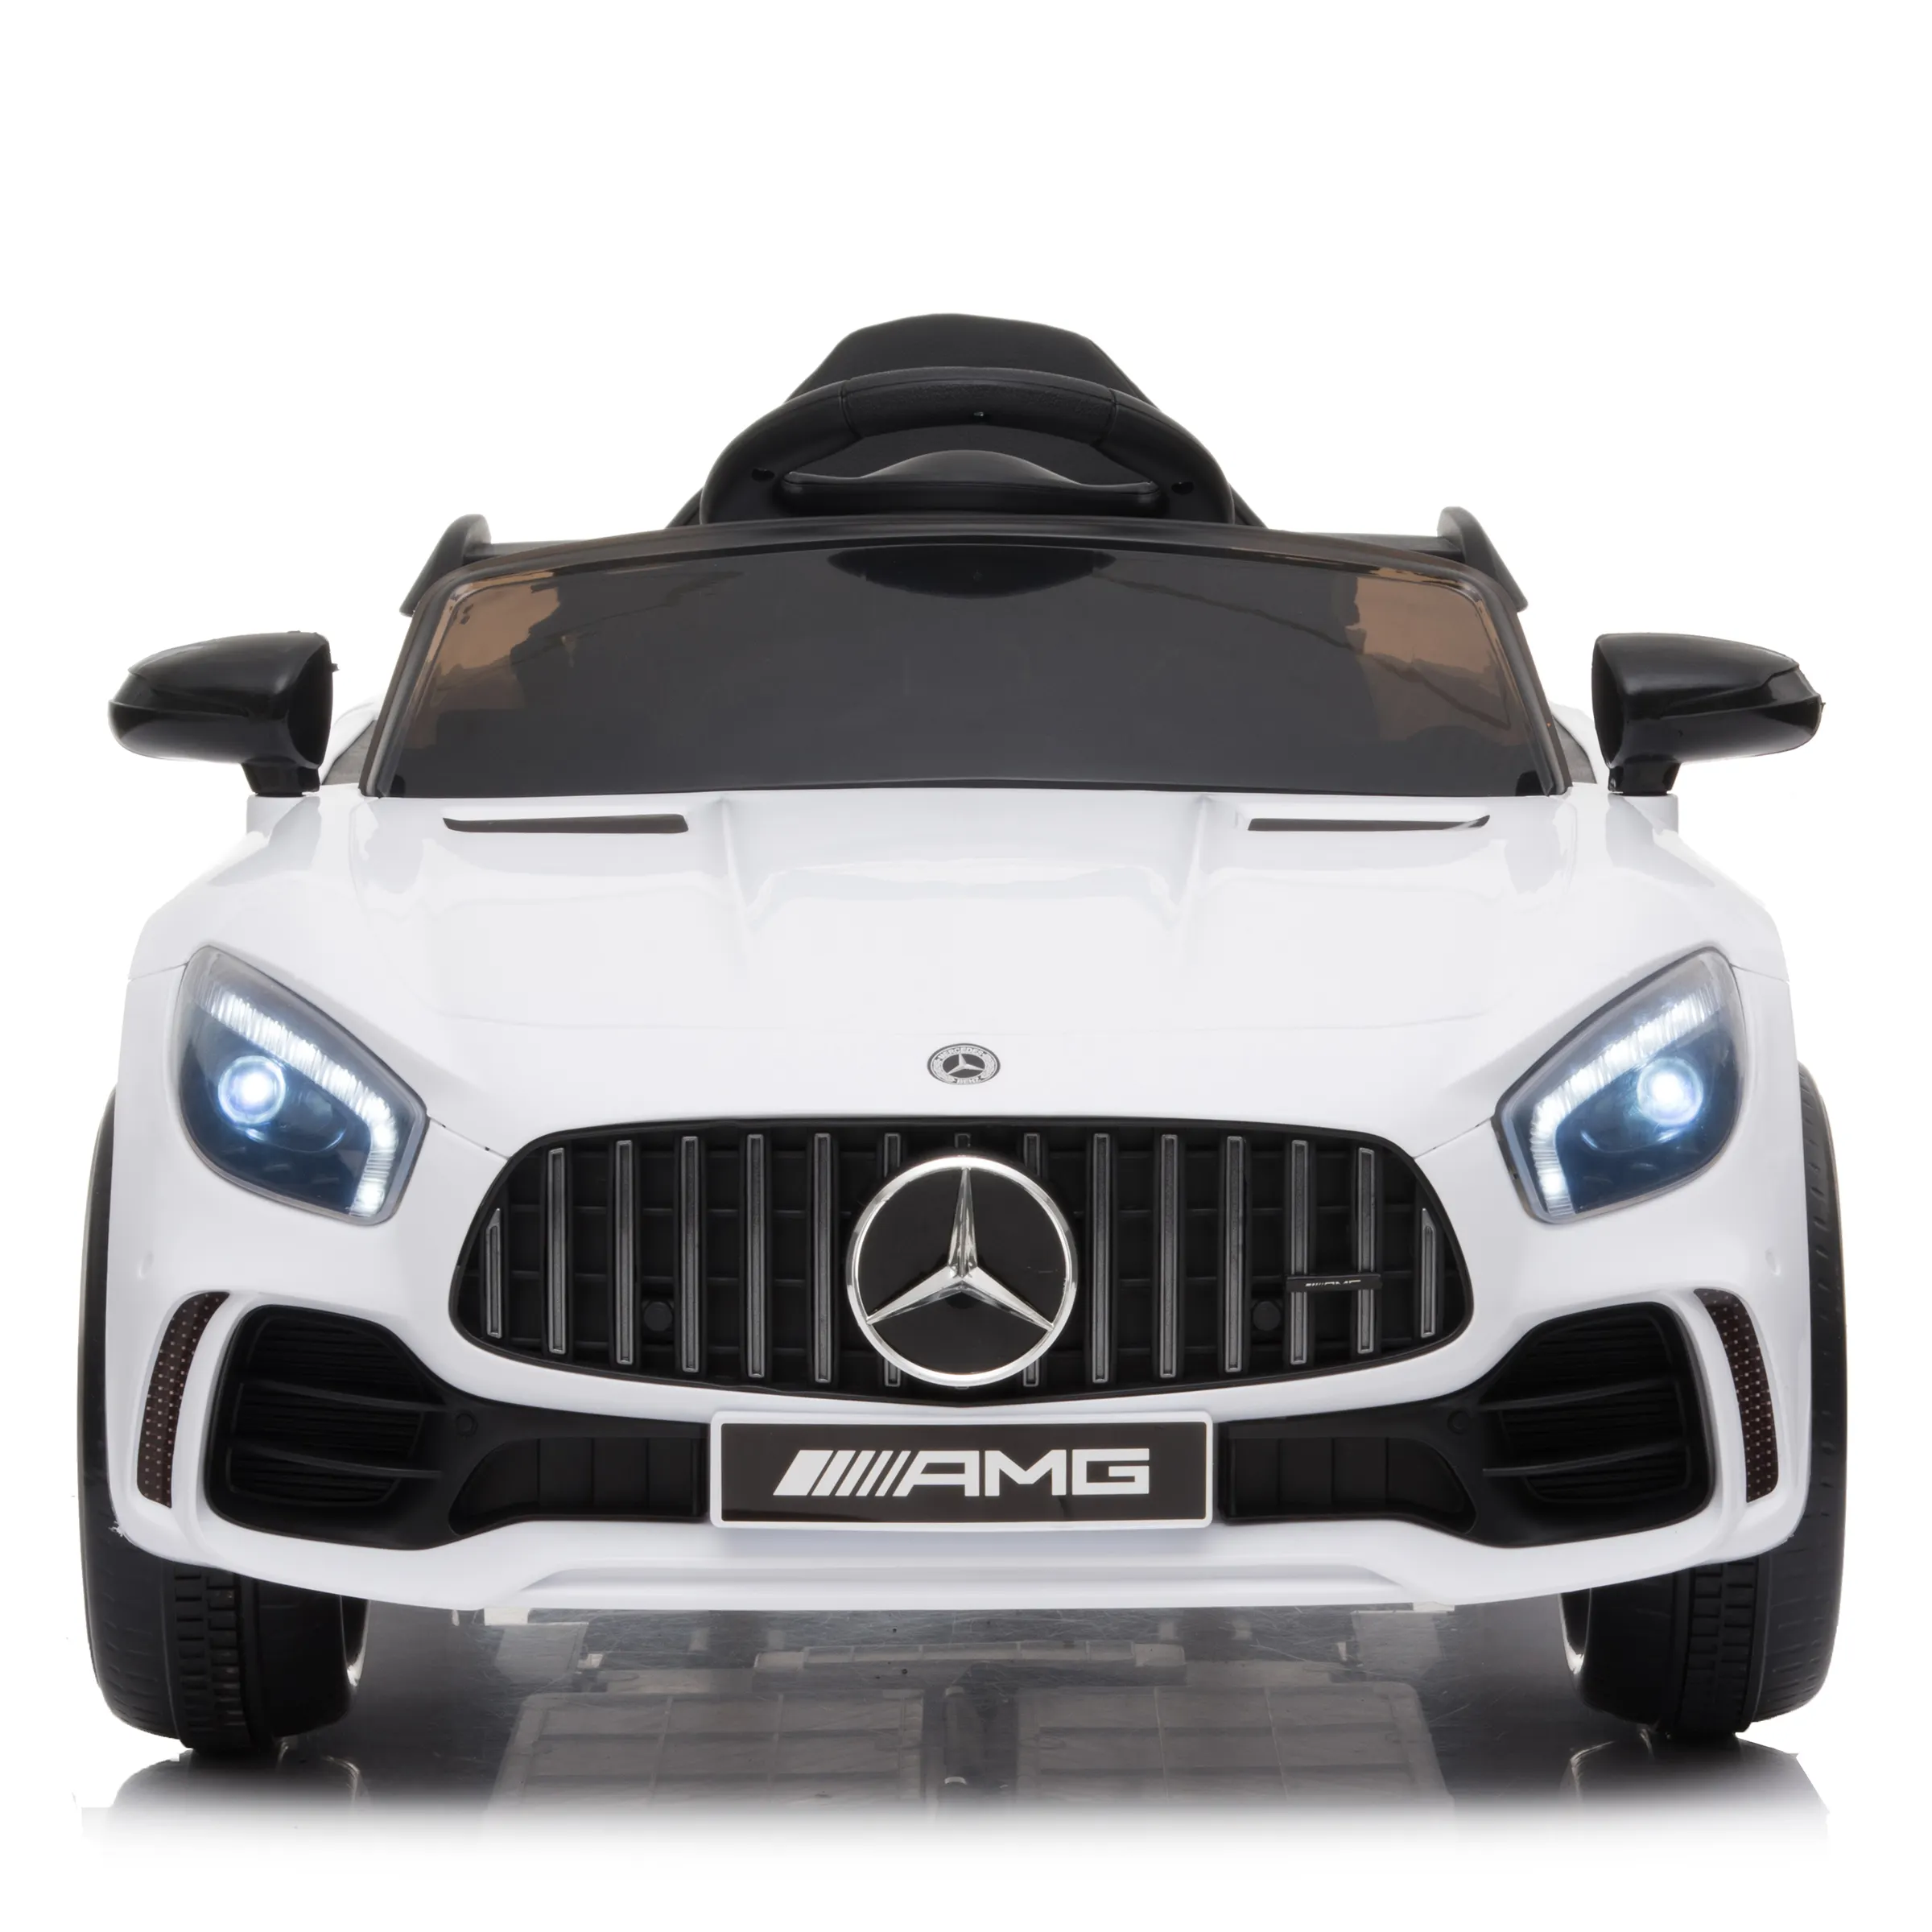 Licensed Mercedes Benz GT-R AMG Electric Car Red Ride On Toy Car White Remote Control Green Black Electric Kids Cars